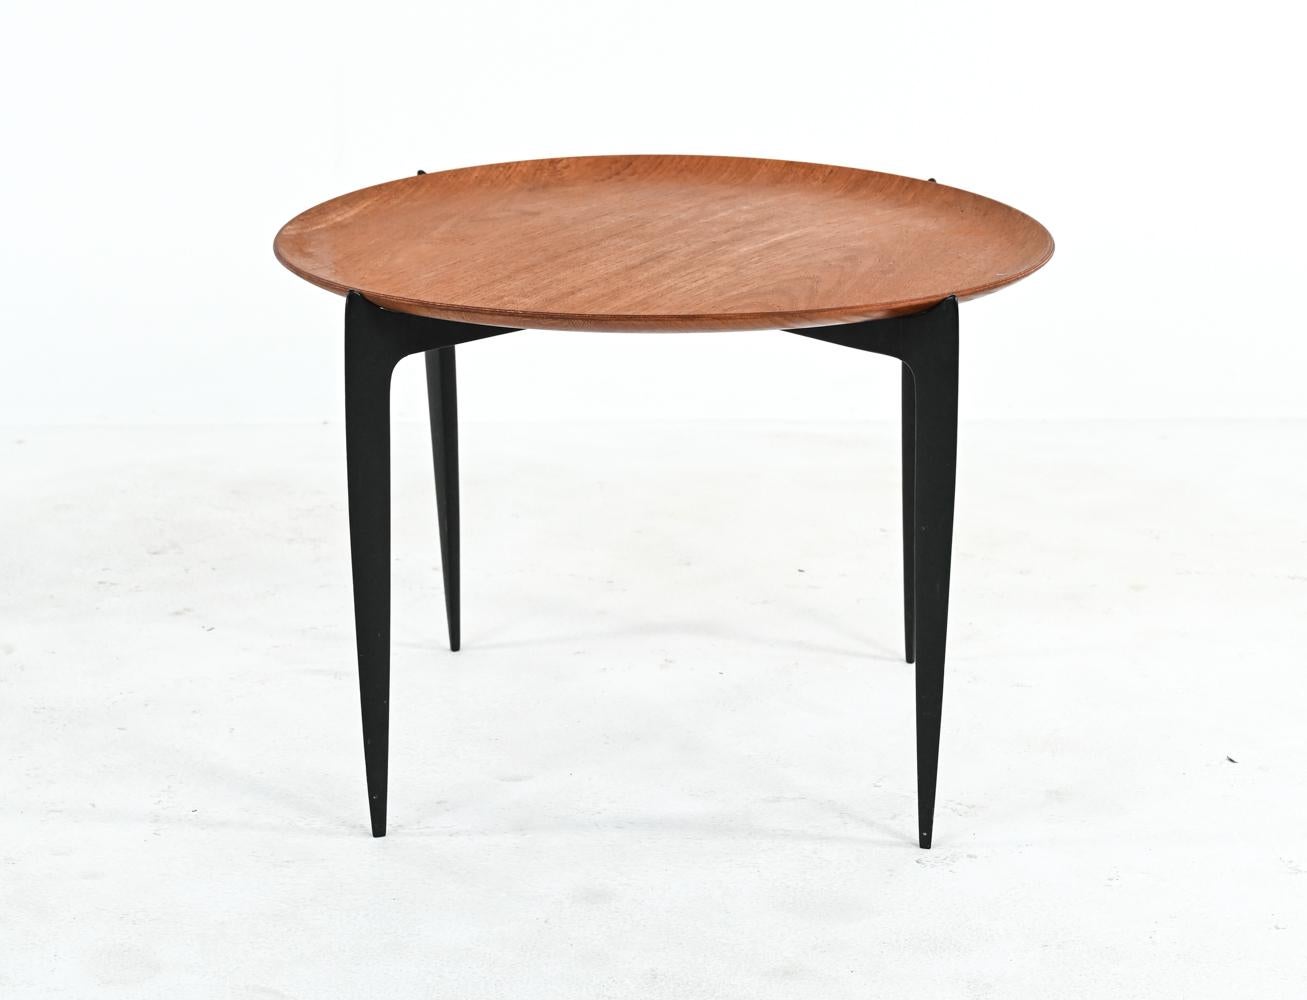 Practical and elegant, this side table consists of a removable circular tray top in teak veneer, perched upon an ebonized wood base that cleverly collapses for easy storage. Designed by Svend Willumsen and Hans Engholm for Fritz Hansen, produced in